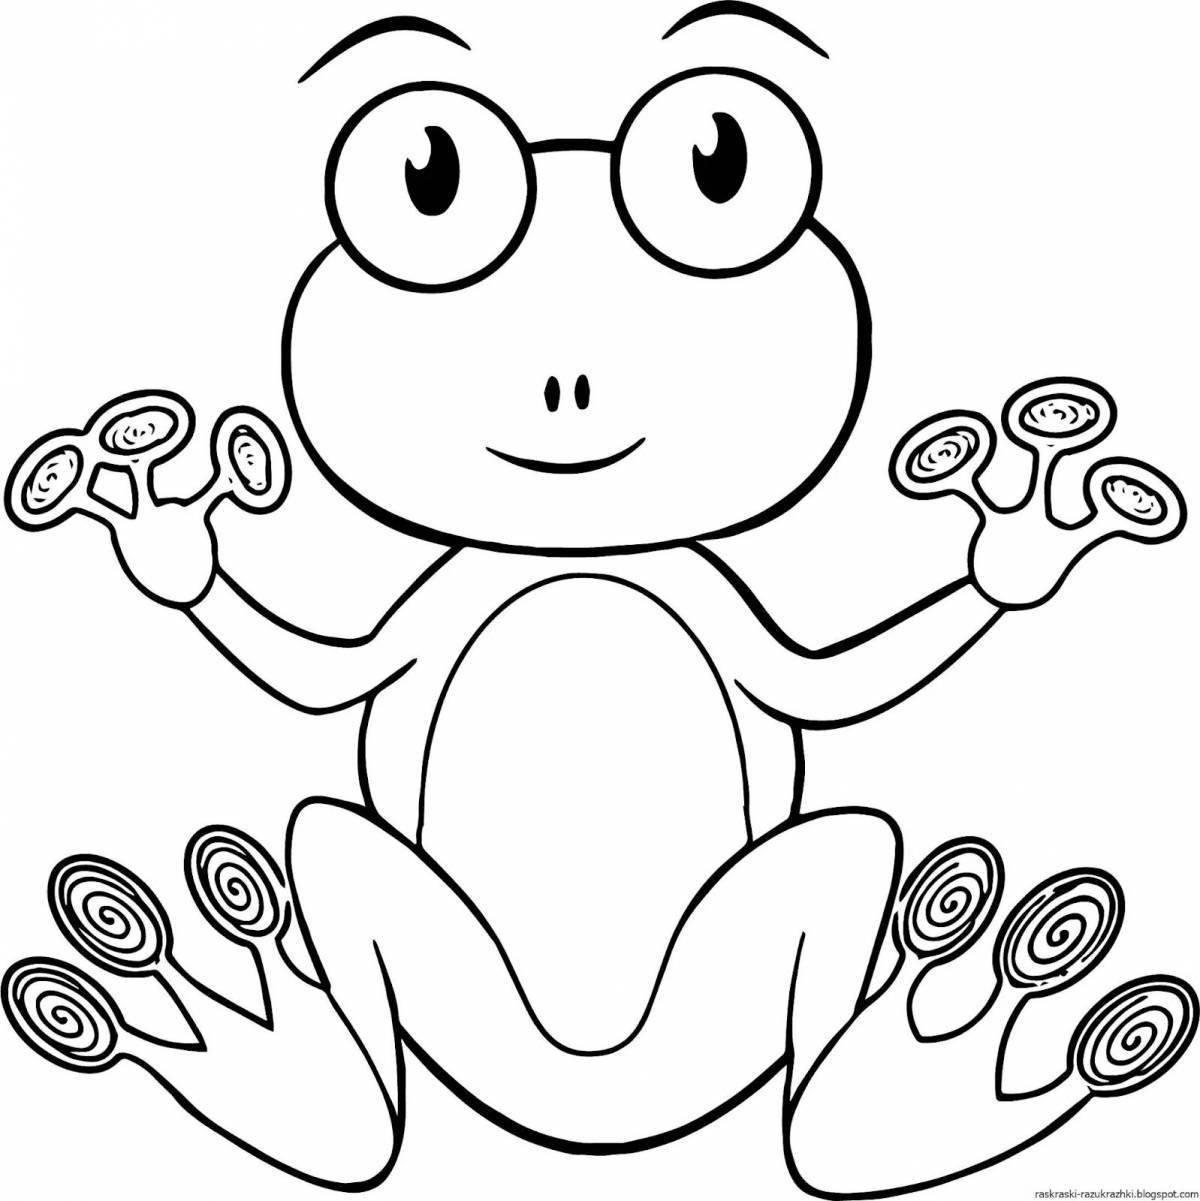 Great toad coloring book for kids